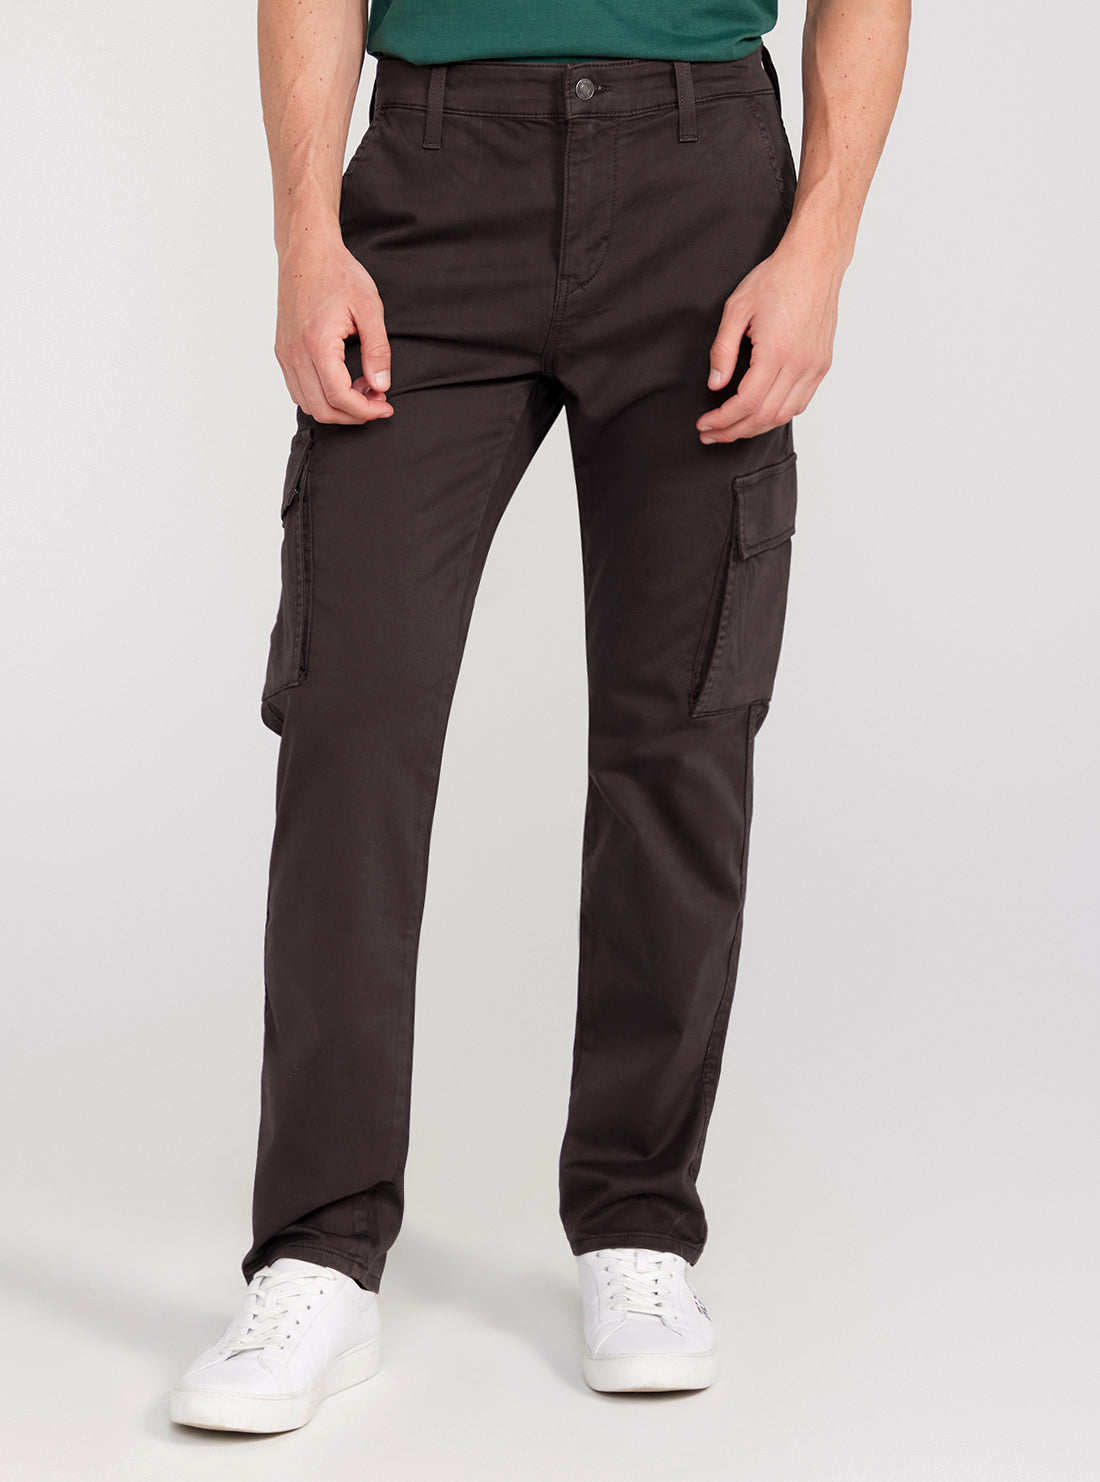 GUESS Brown Sateen Coated Cargo Pants front view